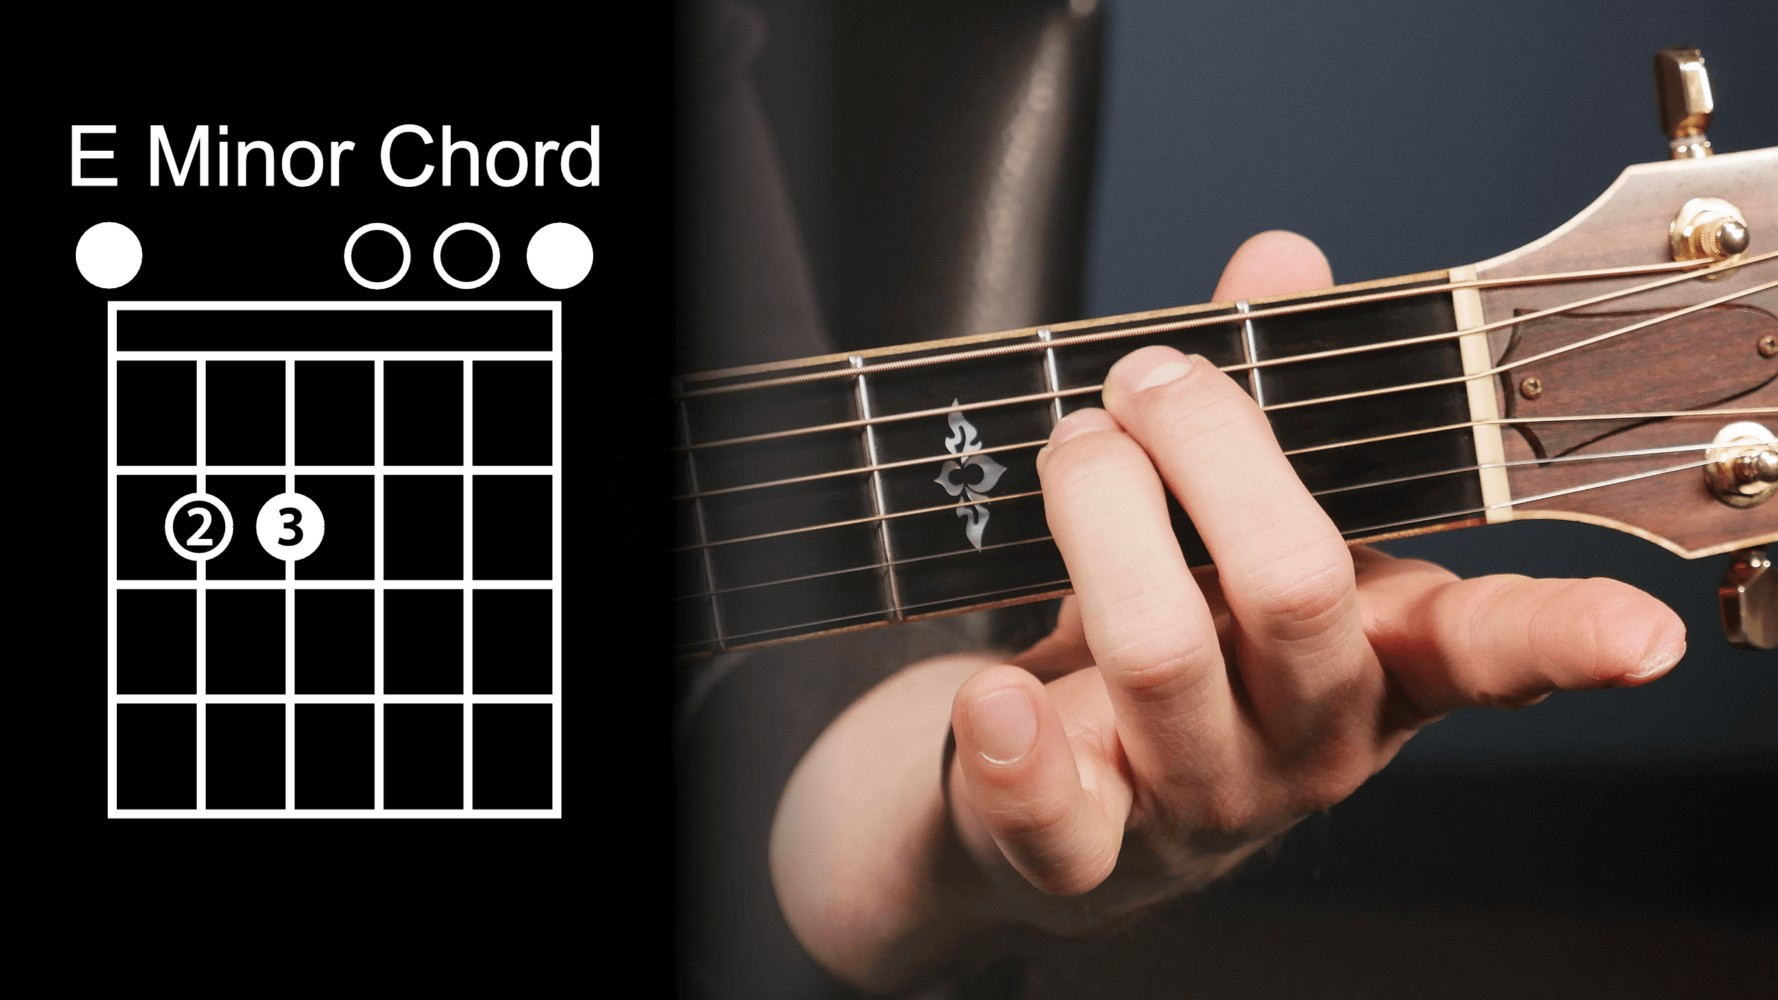 E Minor Chord 8 Beginner Guitar Chords To Learn And Play For Your Kids Today